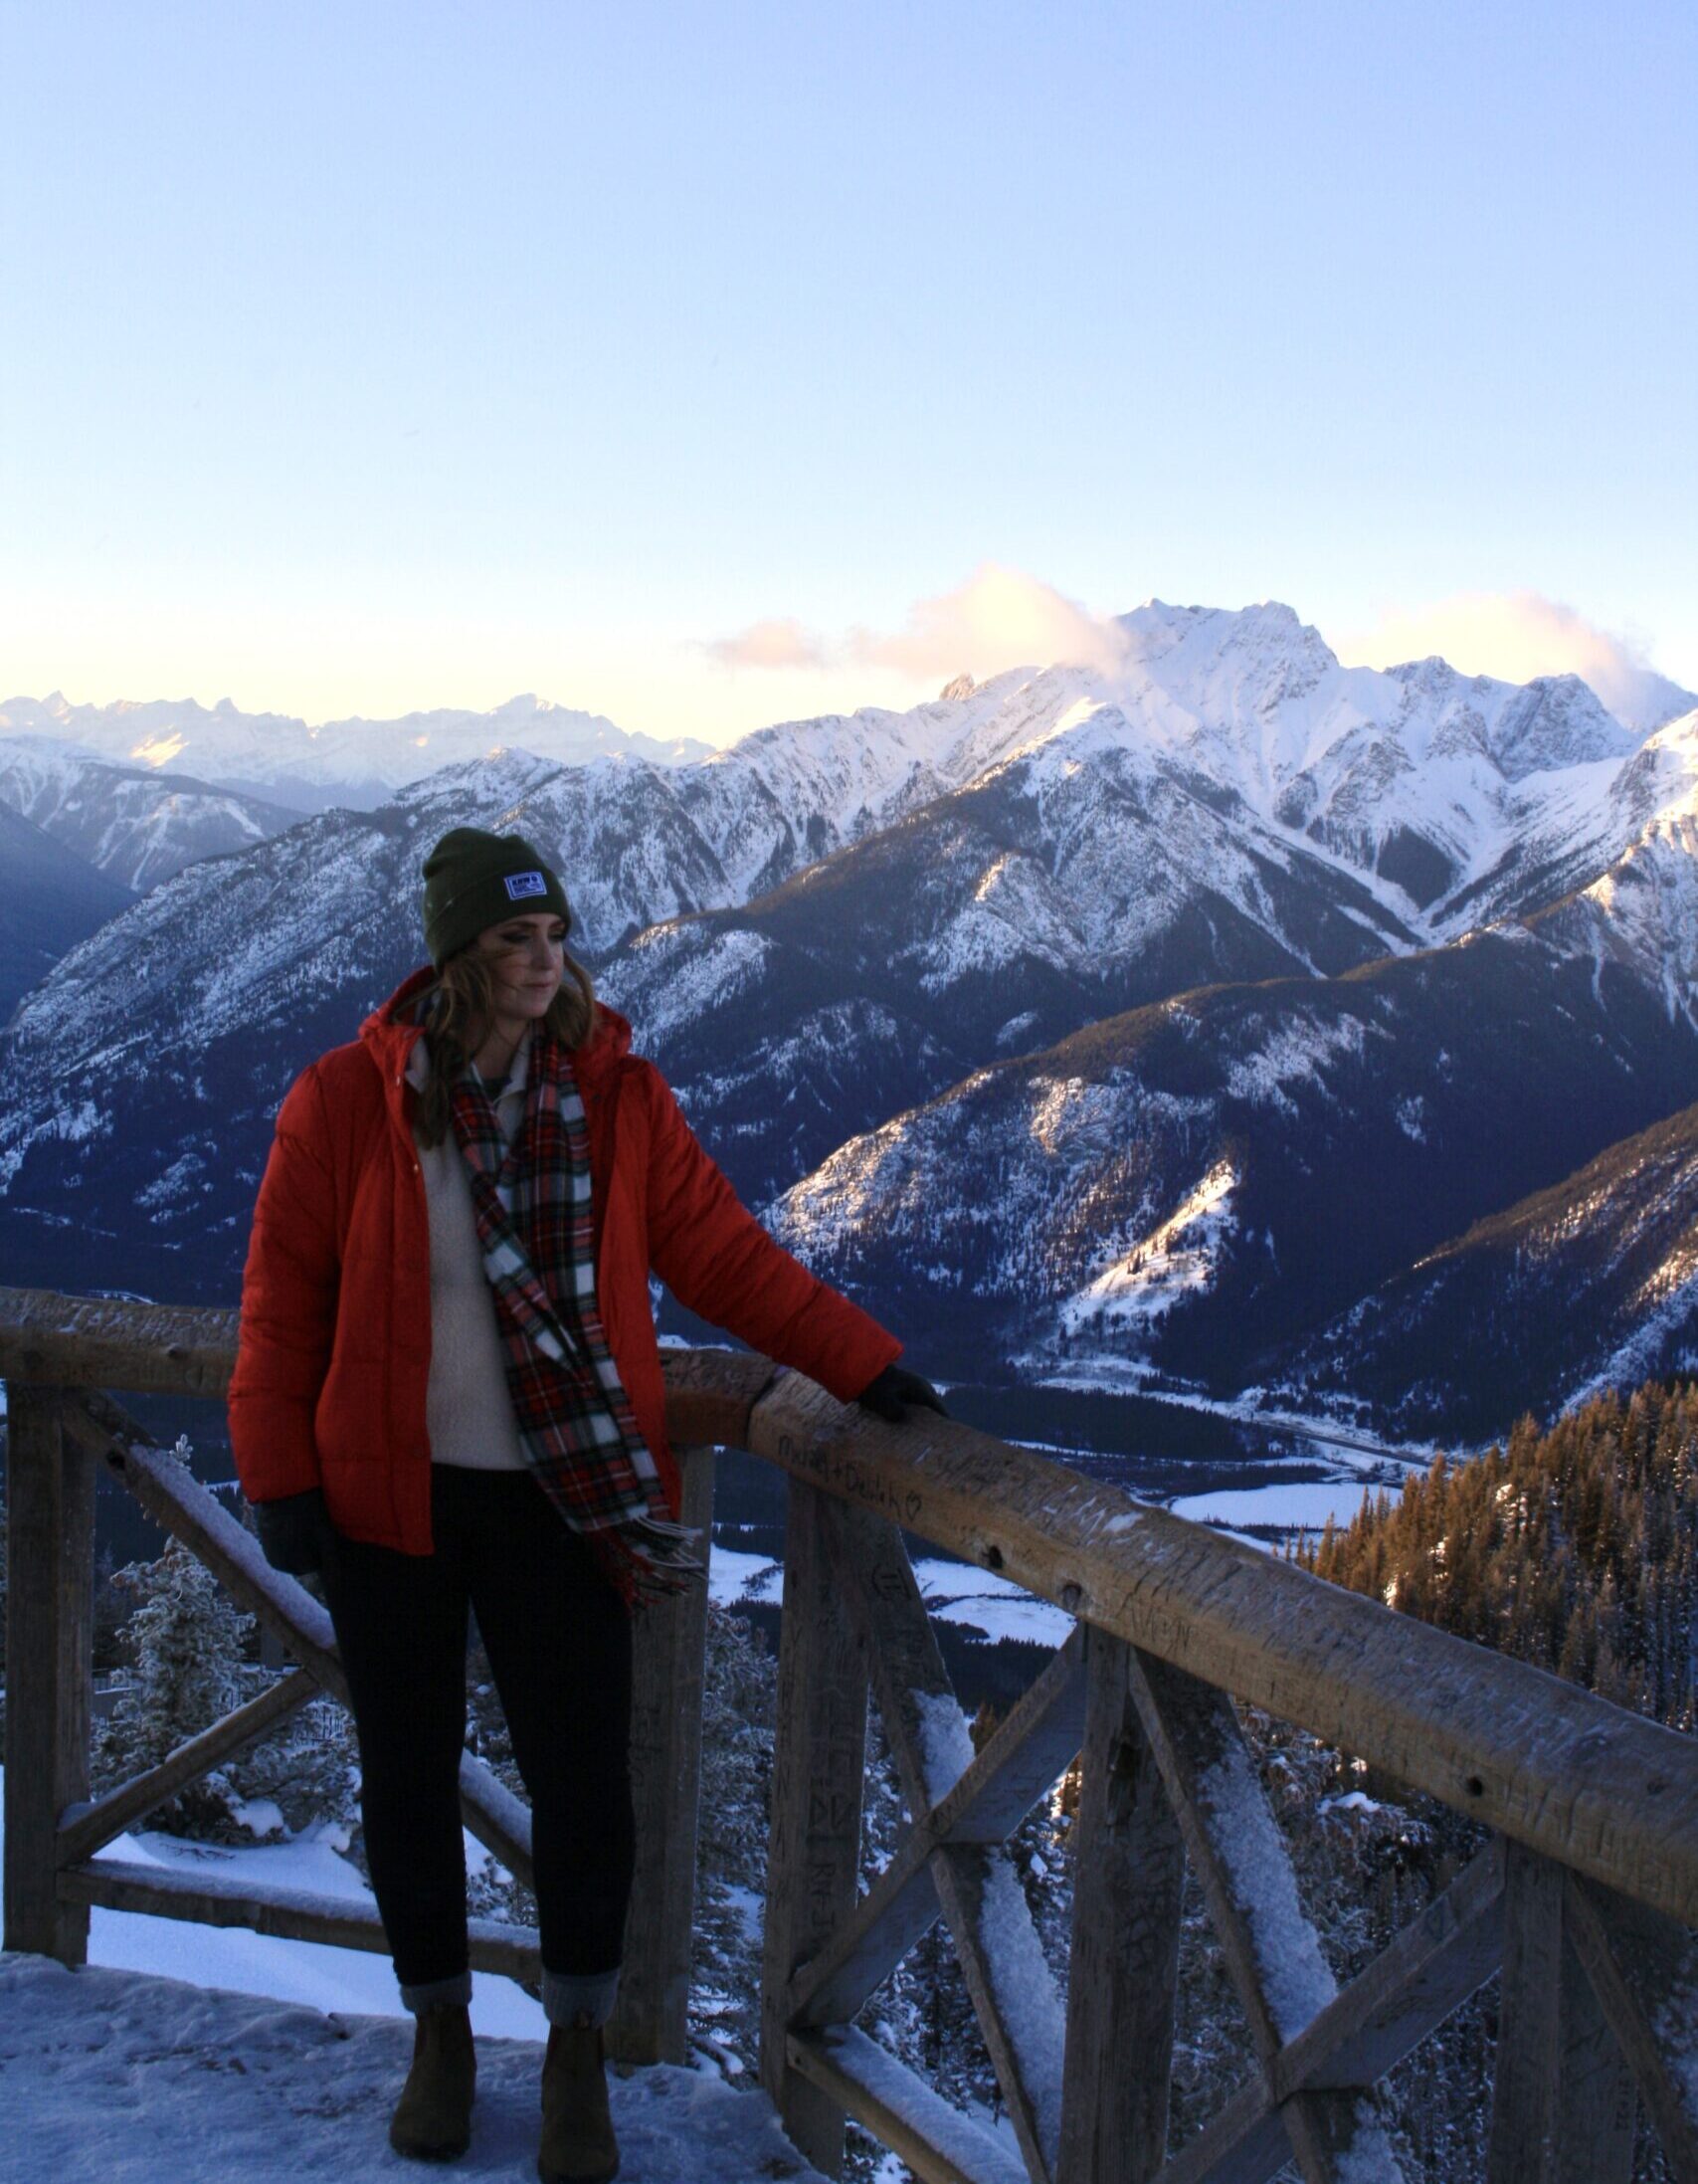 Girl in a Red Coat Holding onto a Wood Rail on top of a mountain